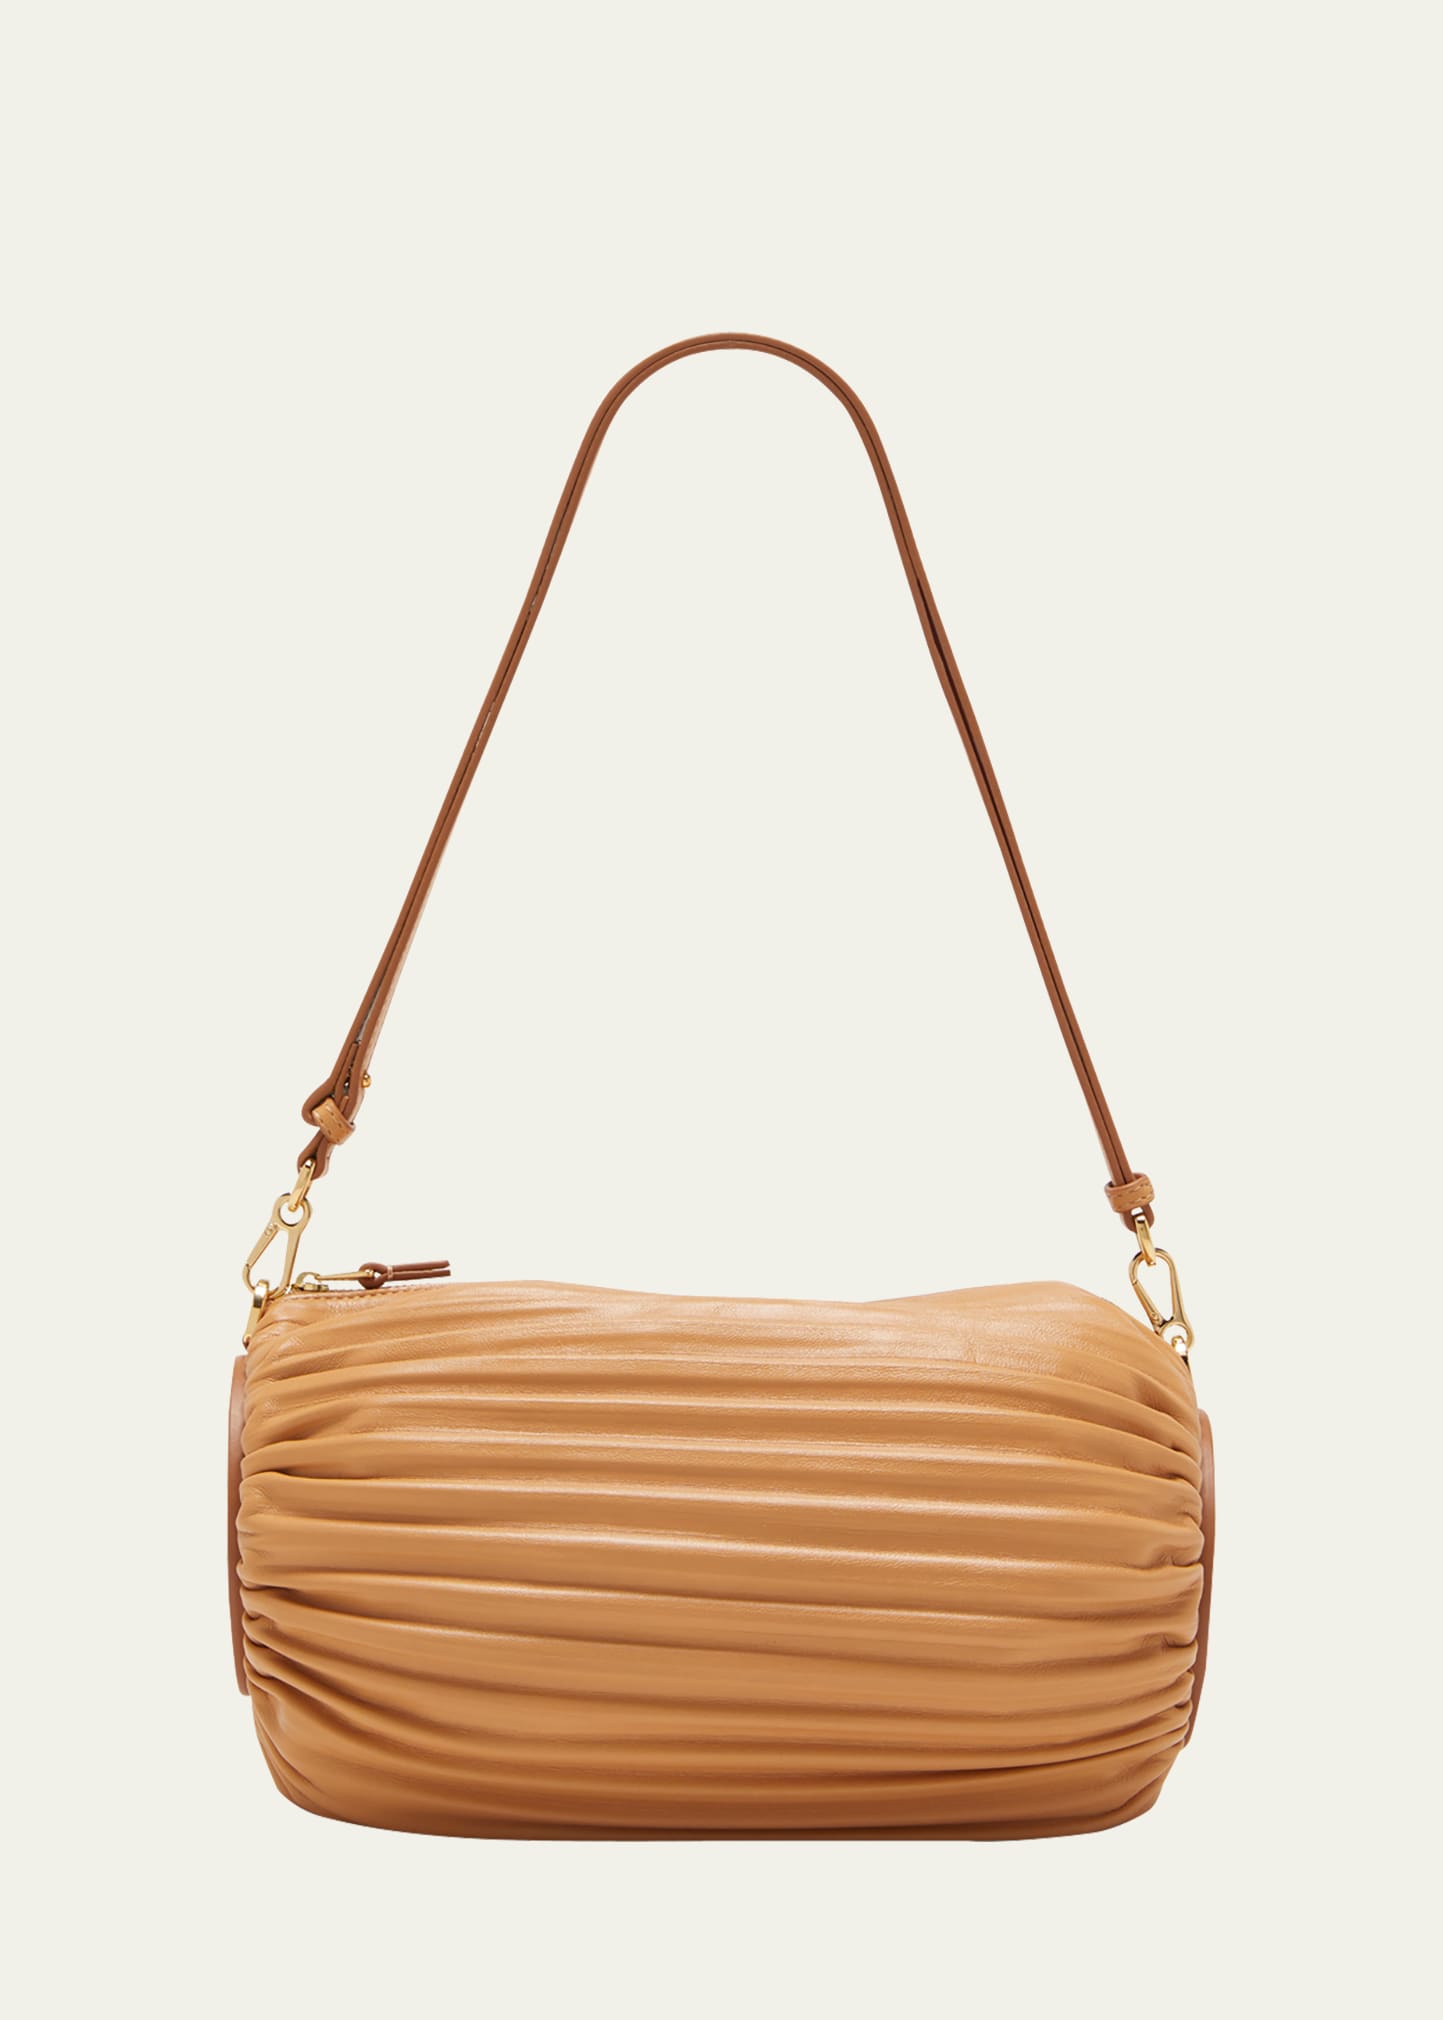 Loewe X Paula's Ibiza Bracelet Pouch In Pleated Napa Leather With Leather Strap In Warm Desert